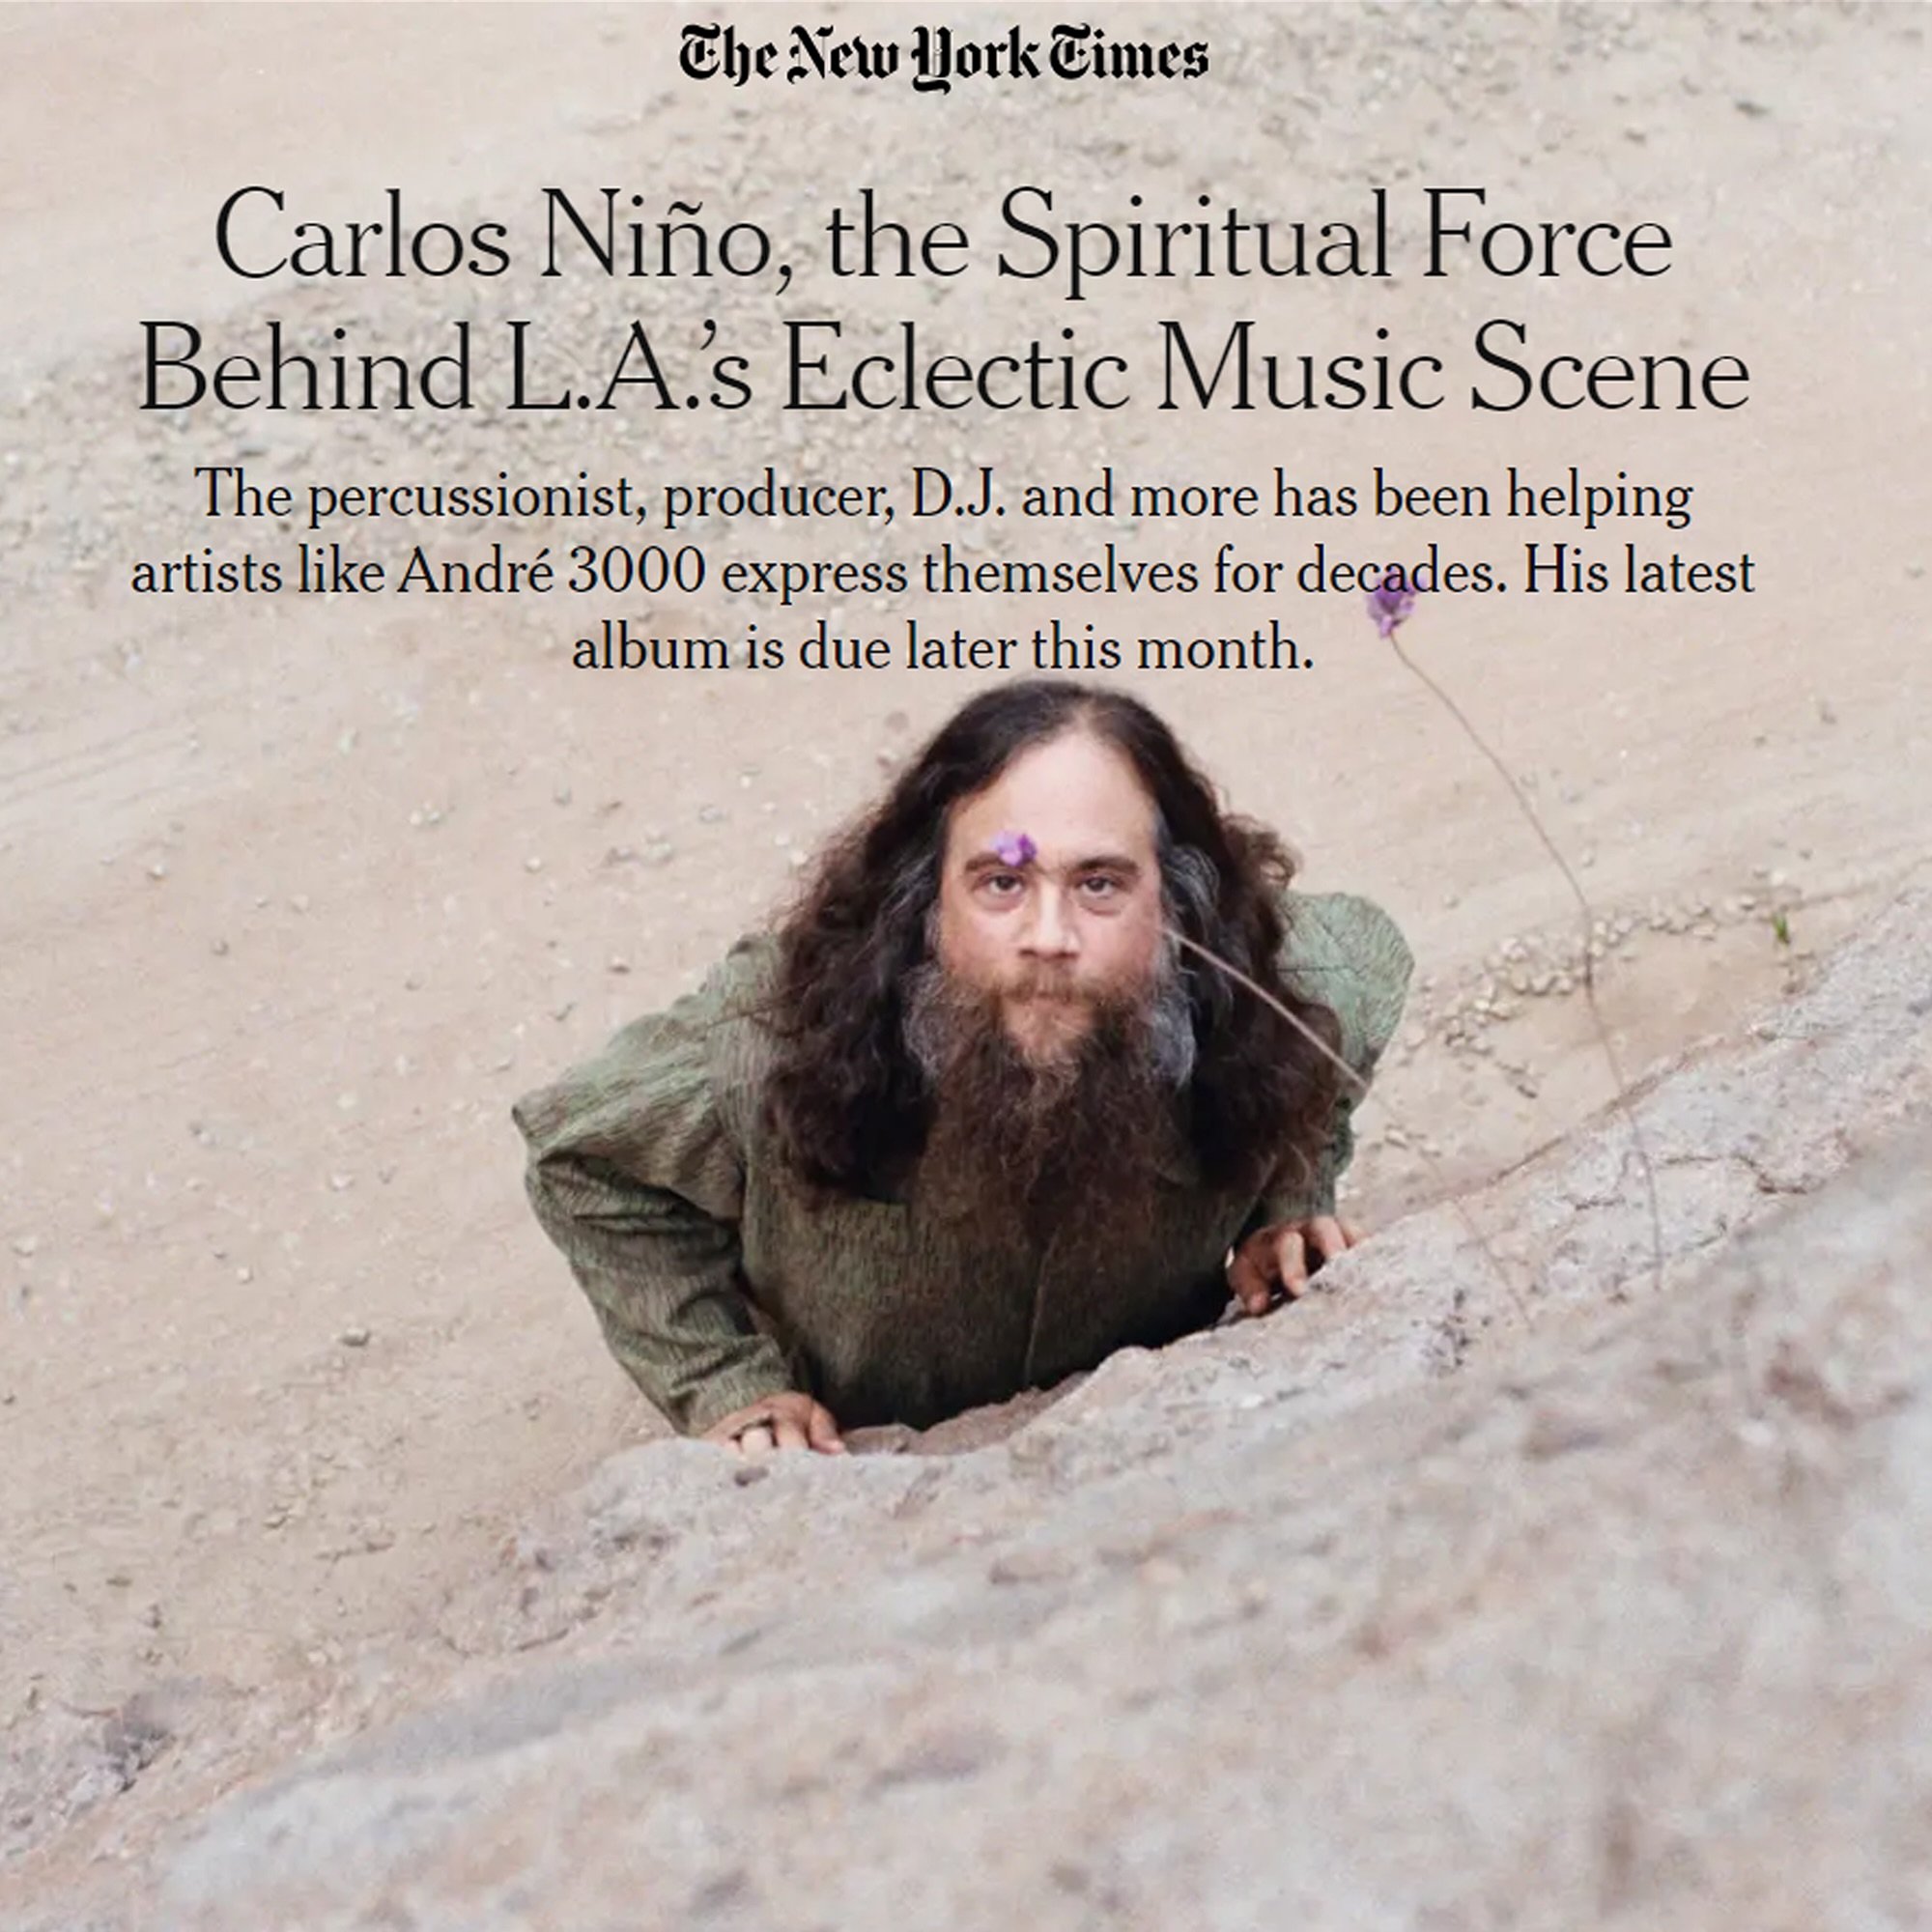 Giant beautiful feature on Carlos Ni&ntilde;o in the @nytimes today highlighting his work on the LA scene in the last 30 years, the spirit and energy of his collaborations with the people who make up &lsquo;&amp; 𝘍𝘳𝘪𝘦𝘯𝘥𝘴&rsquo; as well as a lo